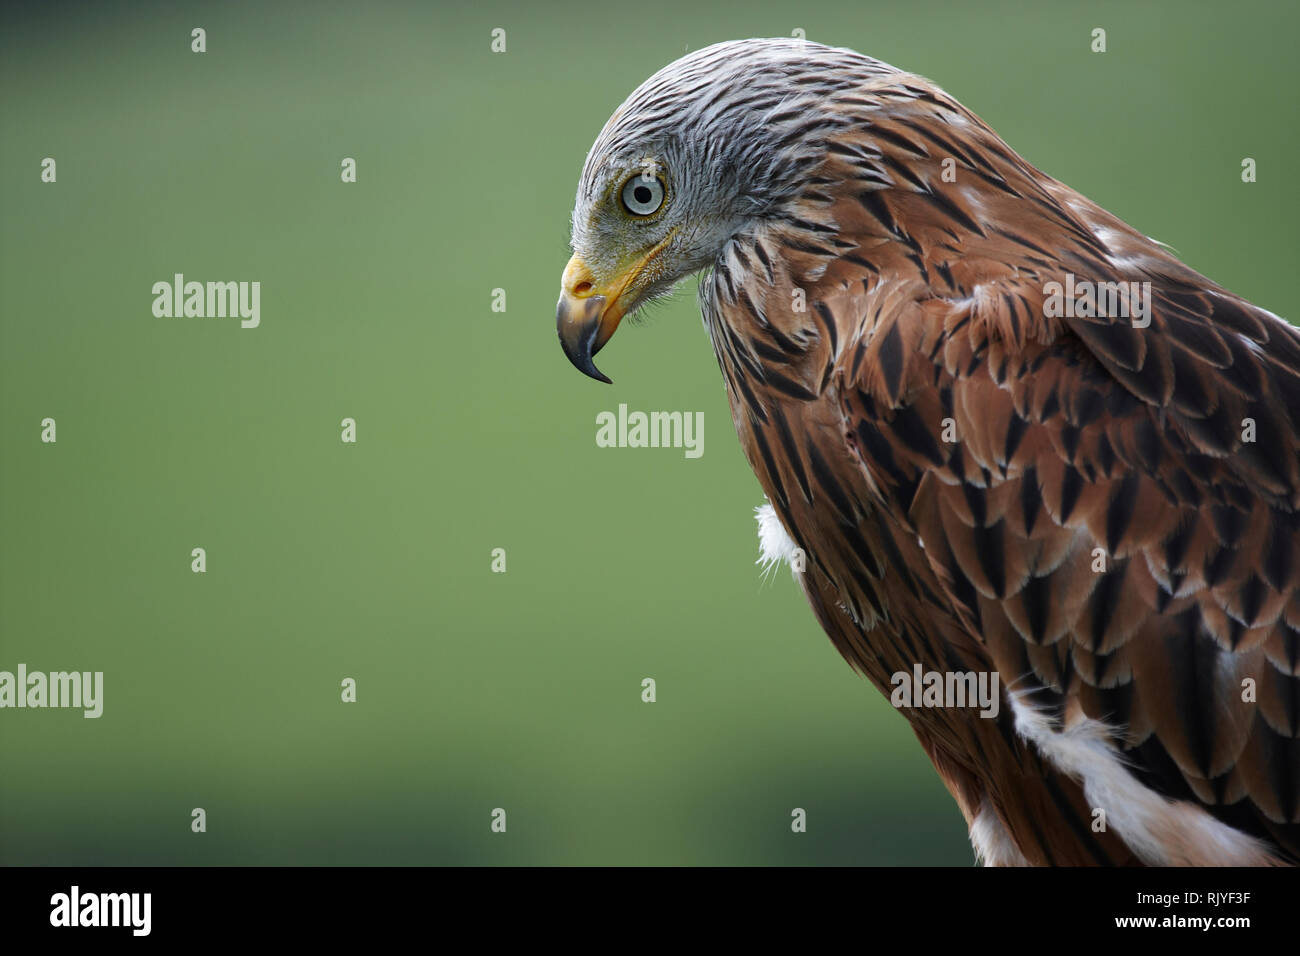 Closeup of head and shoulders of a Red Kite,Milvus milvus,with a plain background. Stock Photo